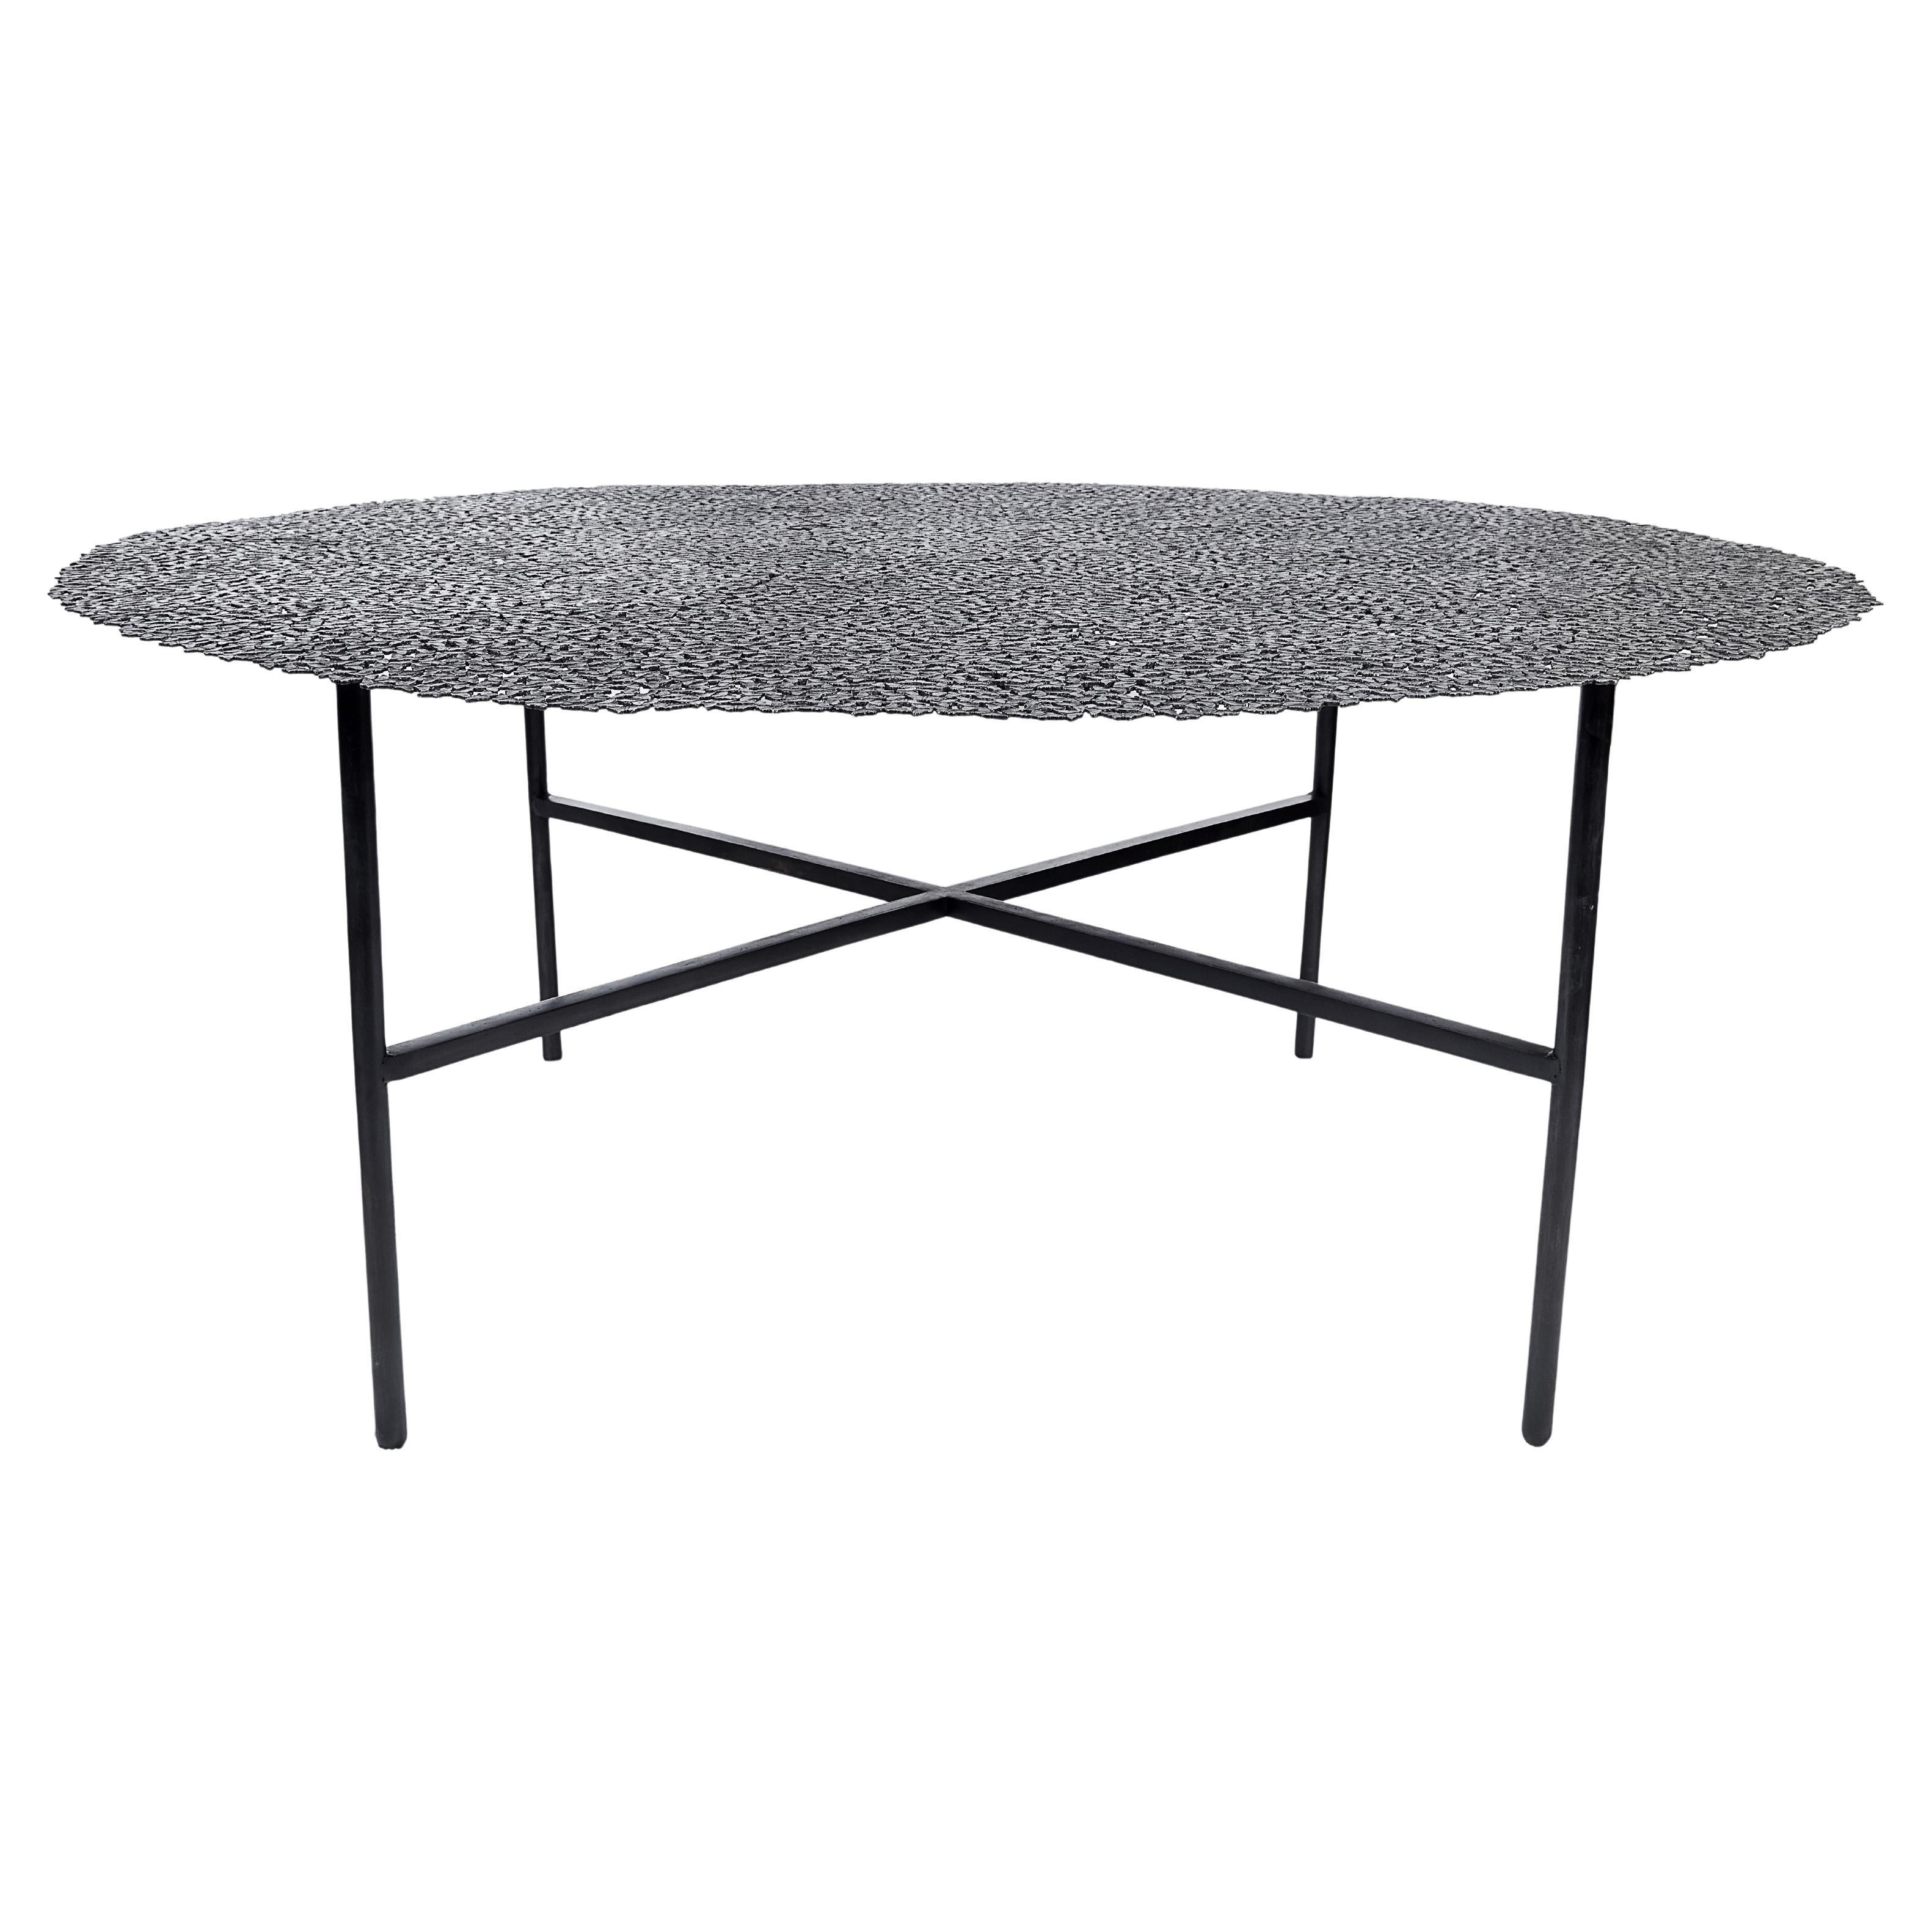 Jean Black Patina Bronze Dining Table by Fred and Juul For Sale